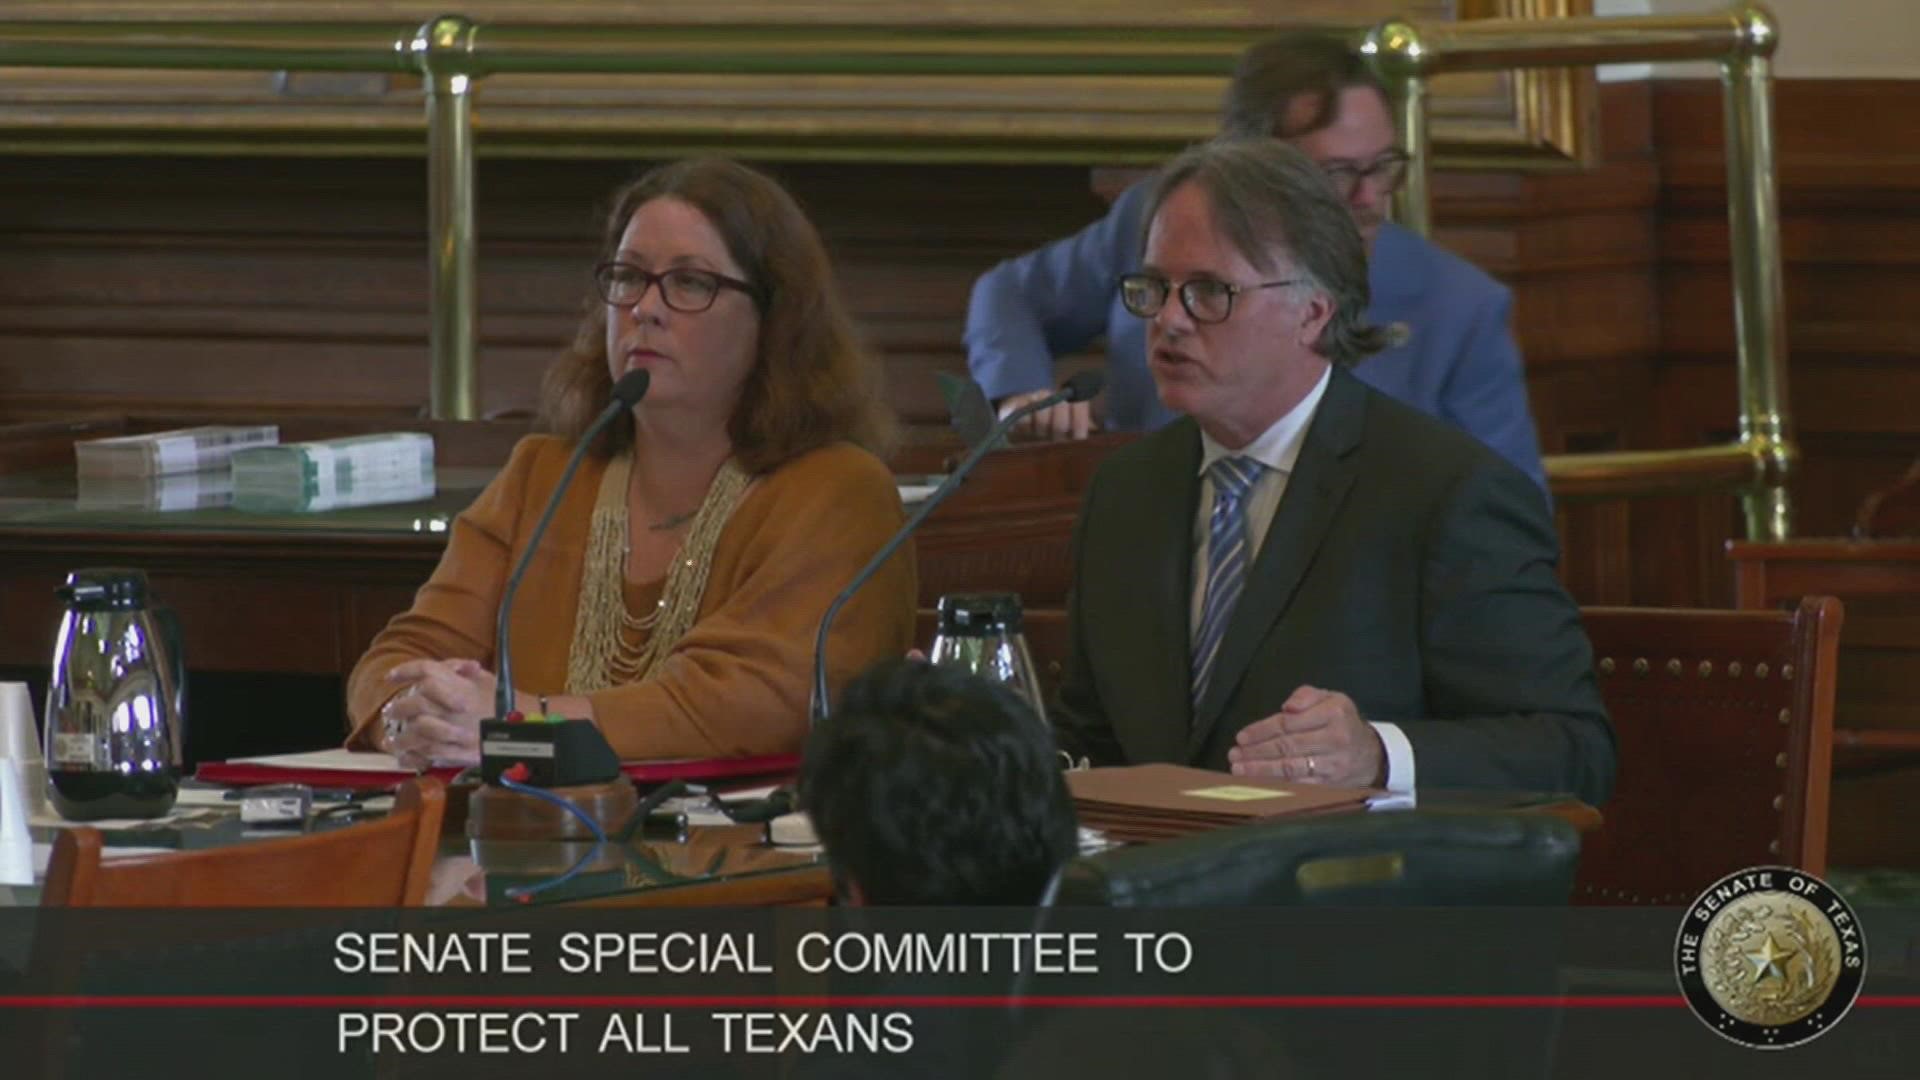 A special Senate committee talked about mental health issues on day 2 of their hearings on the Uvalde school shooting.